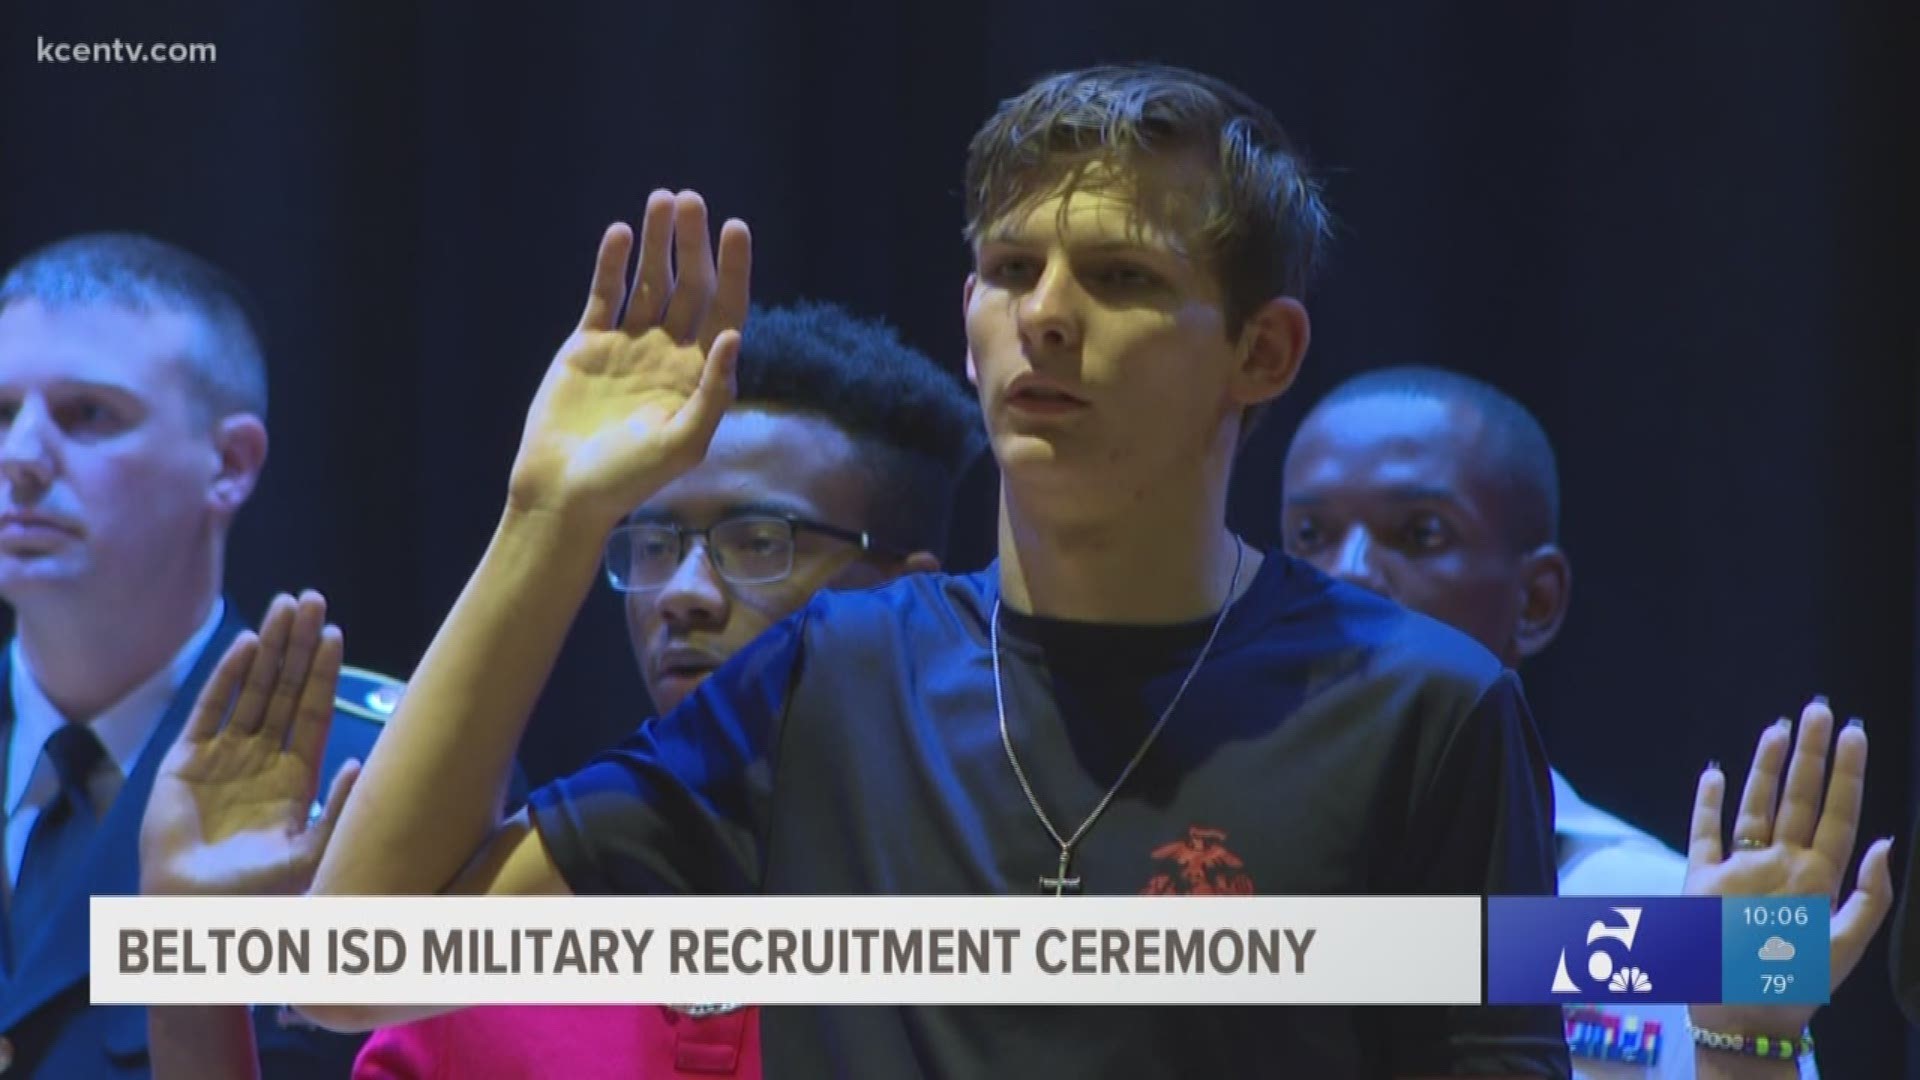 Belton ISD recognizes students joining the military after graduation | 0